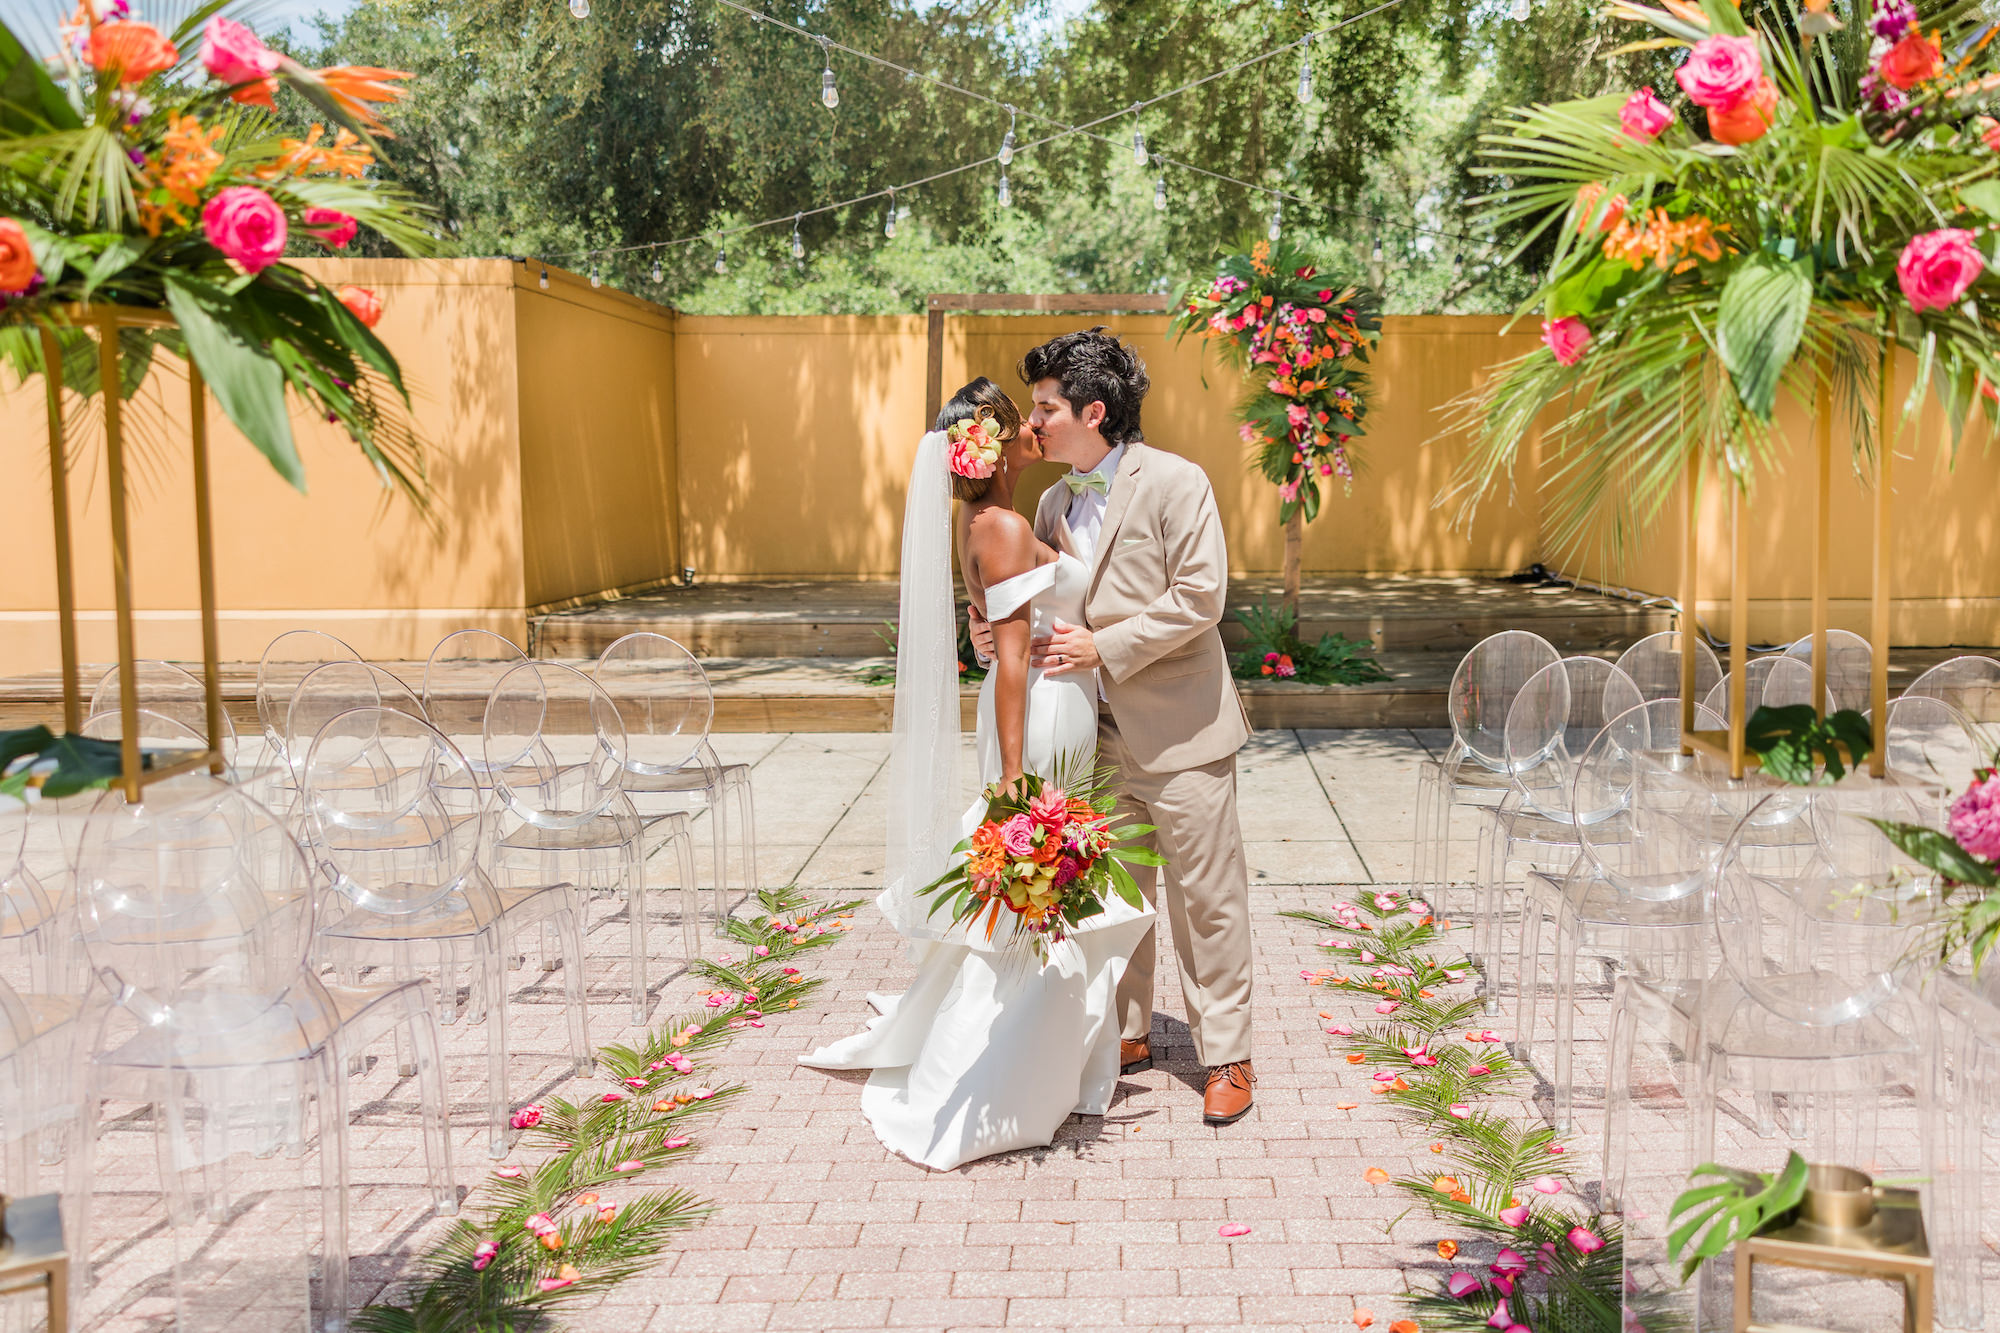 Pink and Orange Tropical Outdoor Courtyard Wedding Ceremony Ideas | Acrylic Oval Ghost Chairs | Tampa Bay Rental A Chair Affair | Wedding Venue Tampa Palms Golf & Country Club | Wedding Planner Kelci Leigh Events | Florist Save the Date Florida | Videographer Priceless Design Studio